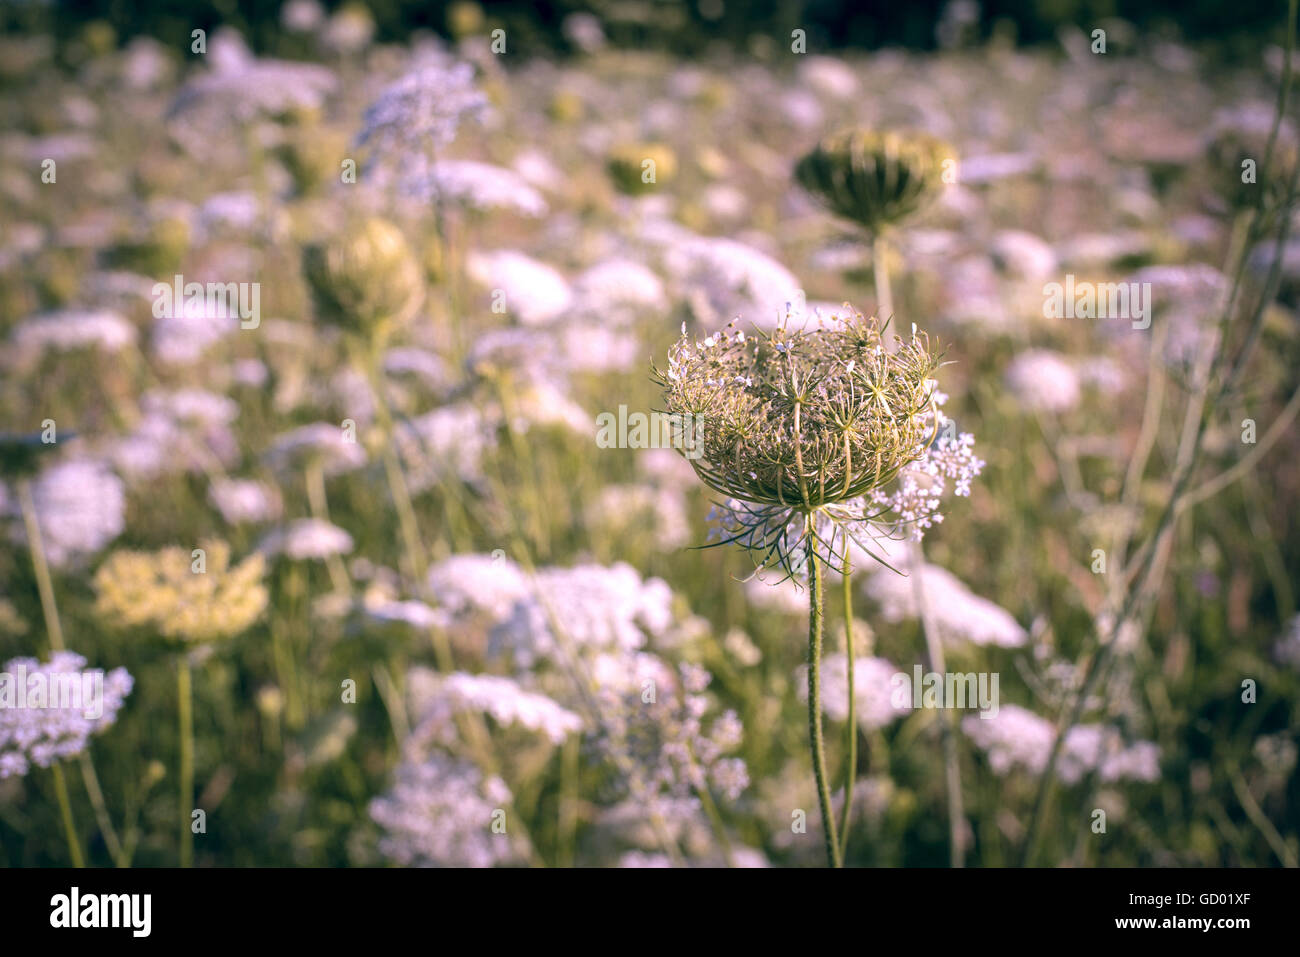 Field of wild flowers, vintage floral nature landscape on the summer season. Stock Photo